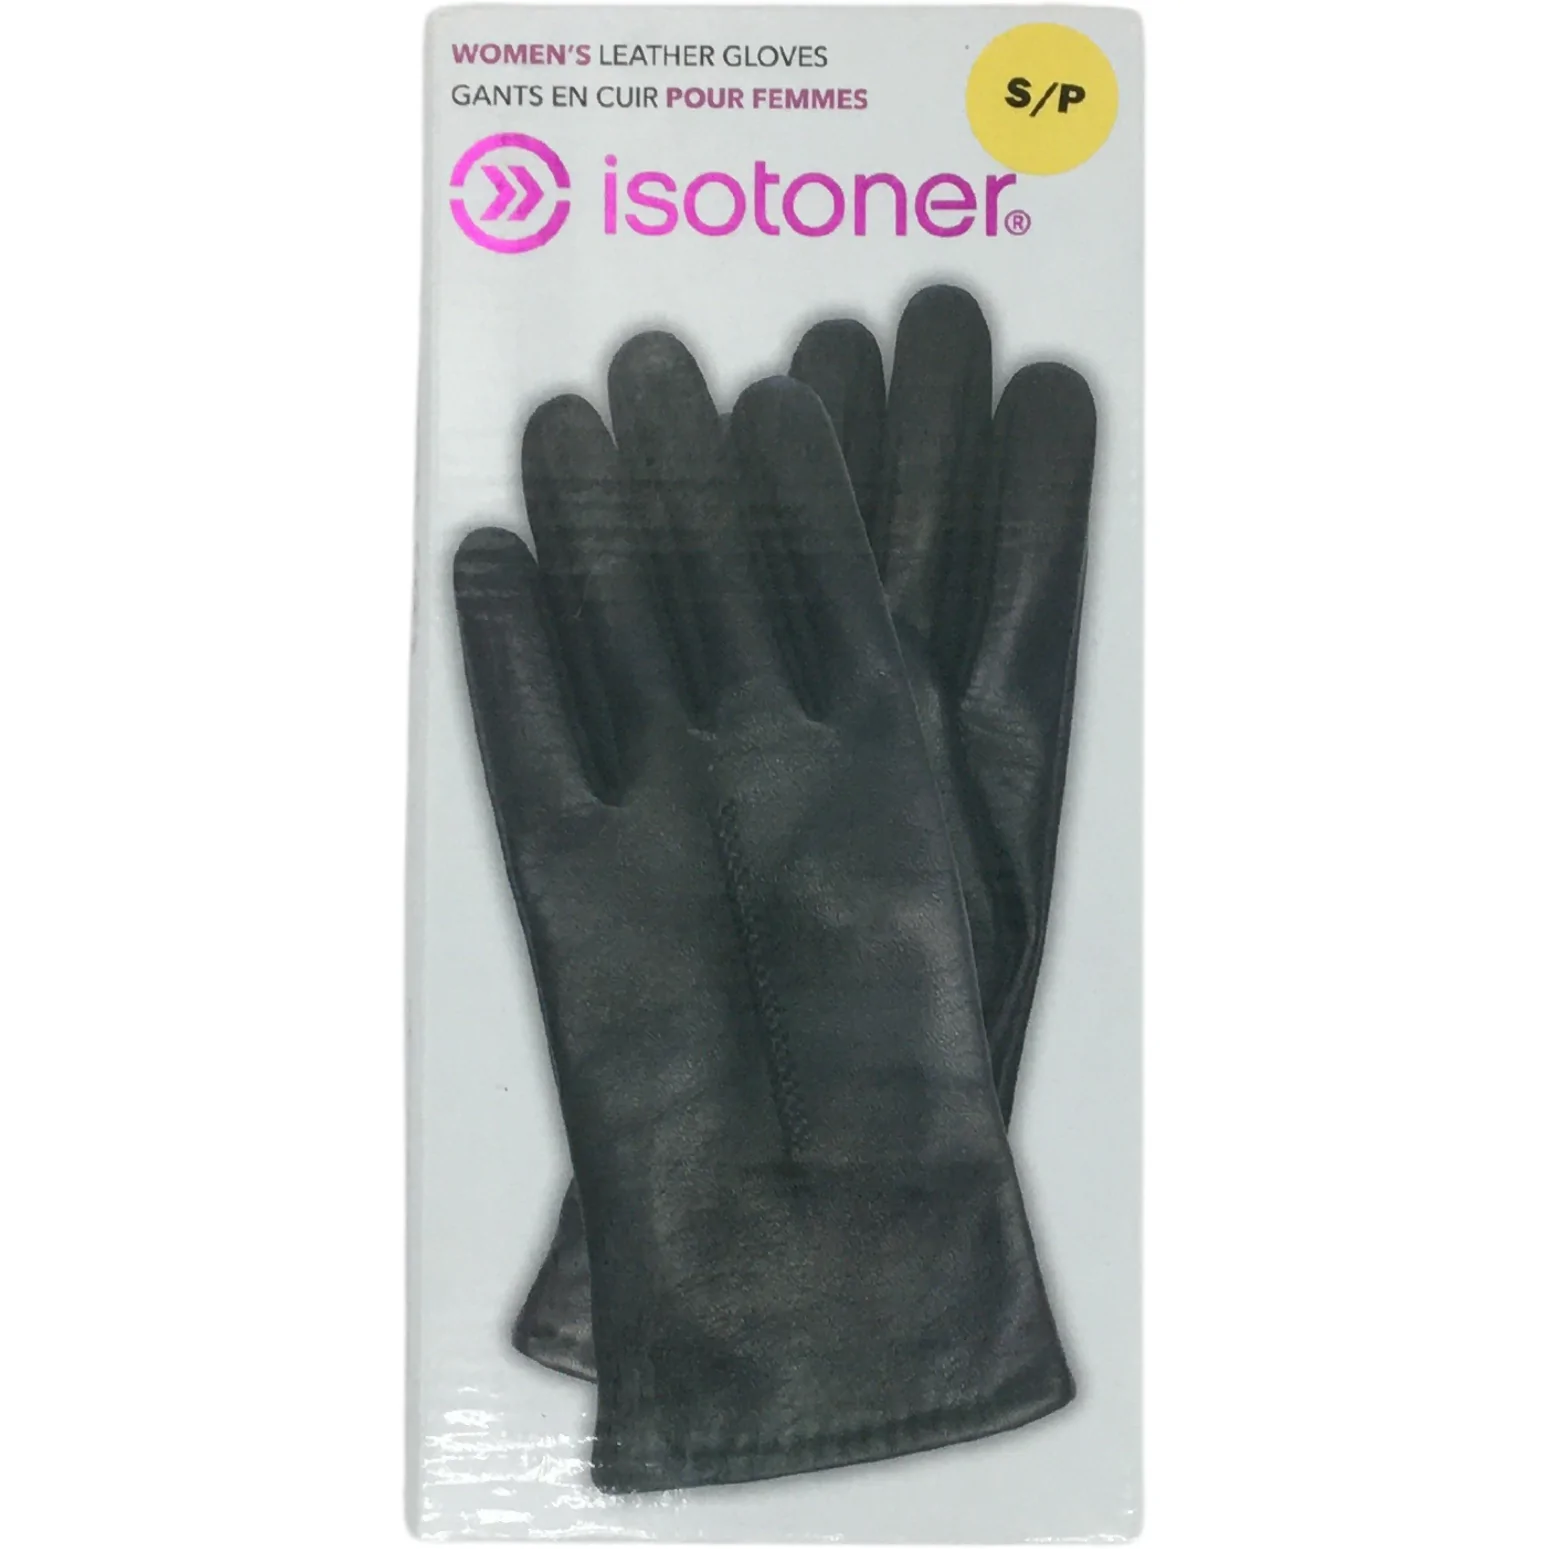 Isotoner Women's Leather Gloves / Winter Gloves / Size Small / Black